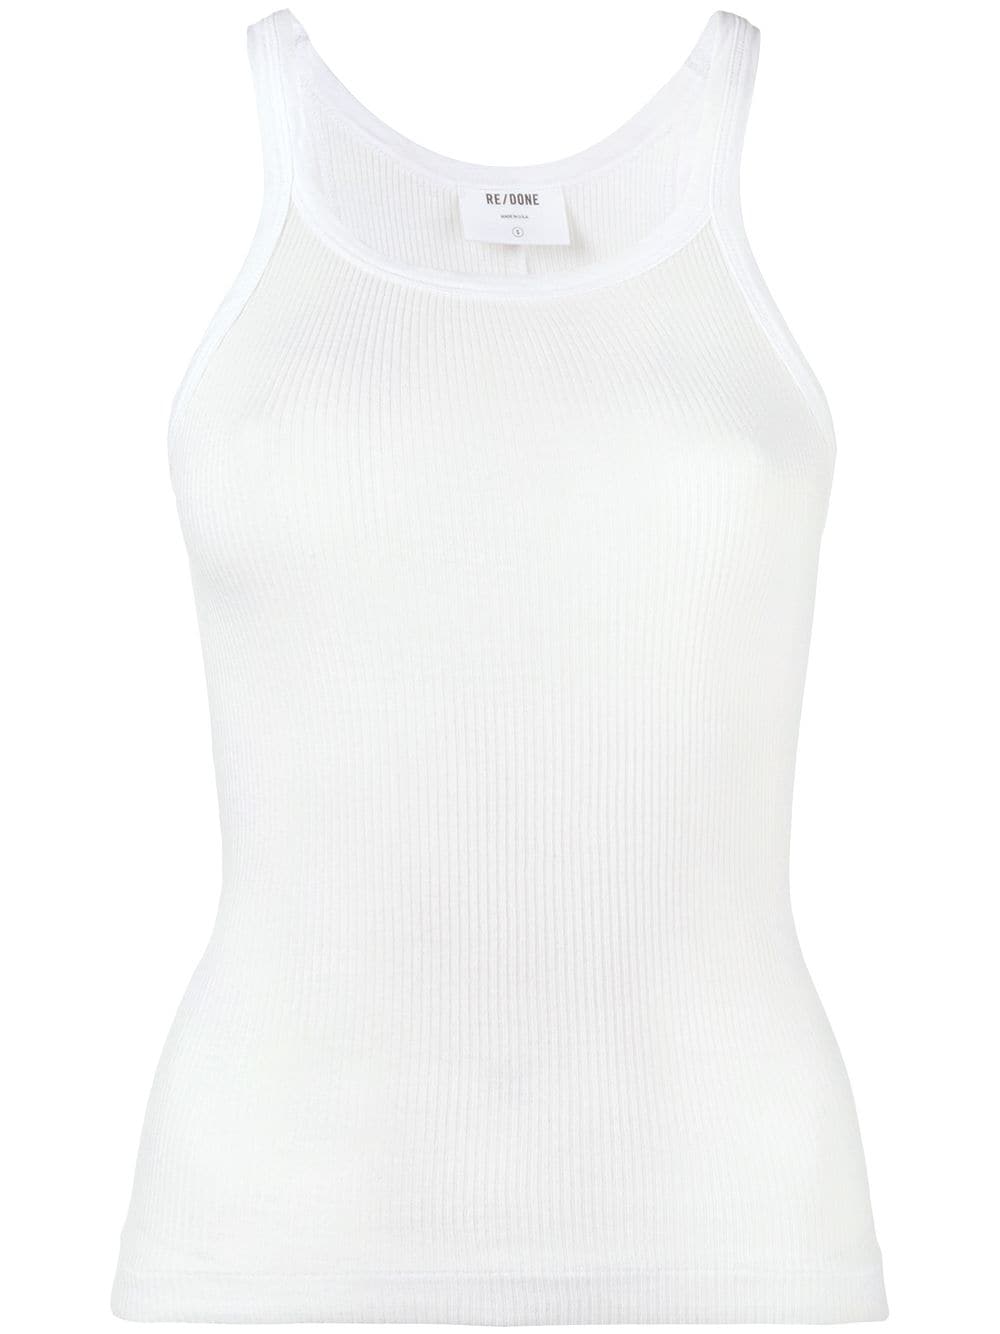 RE/DONE ribbed tank top - White von RE/DONE